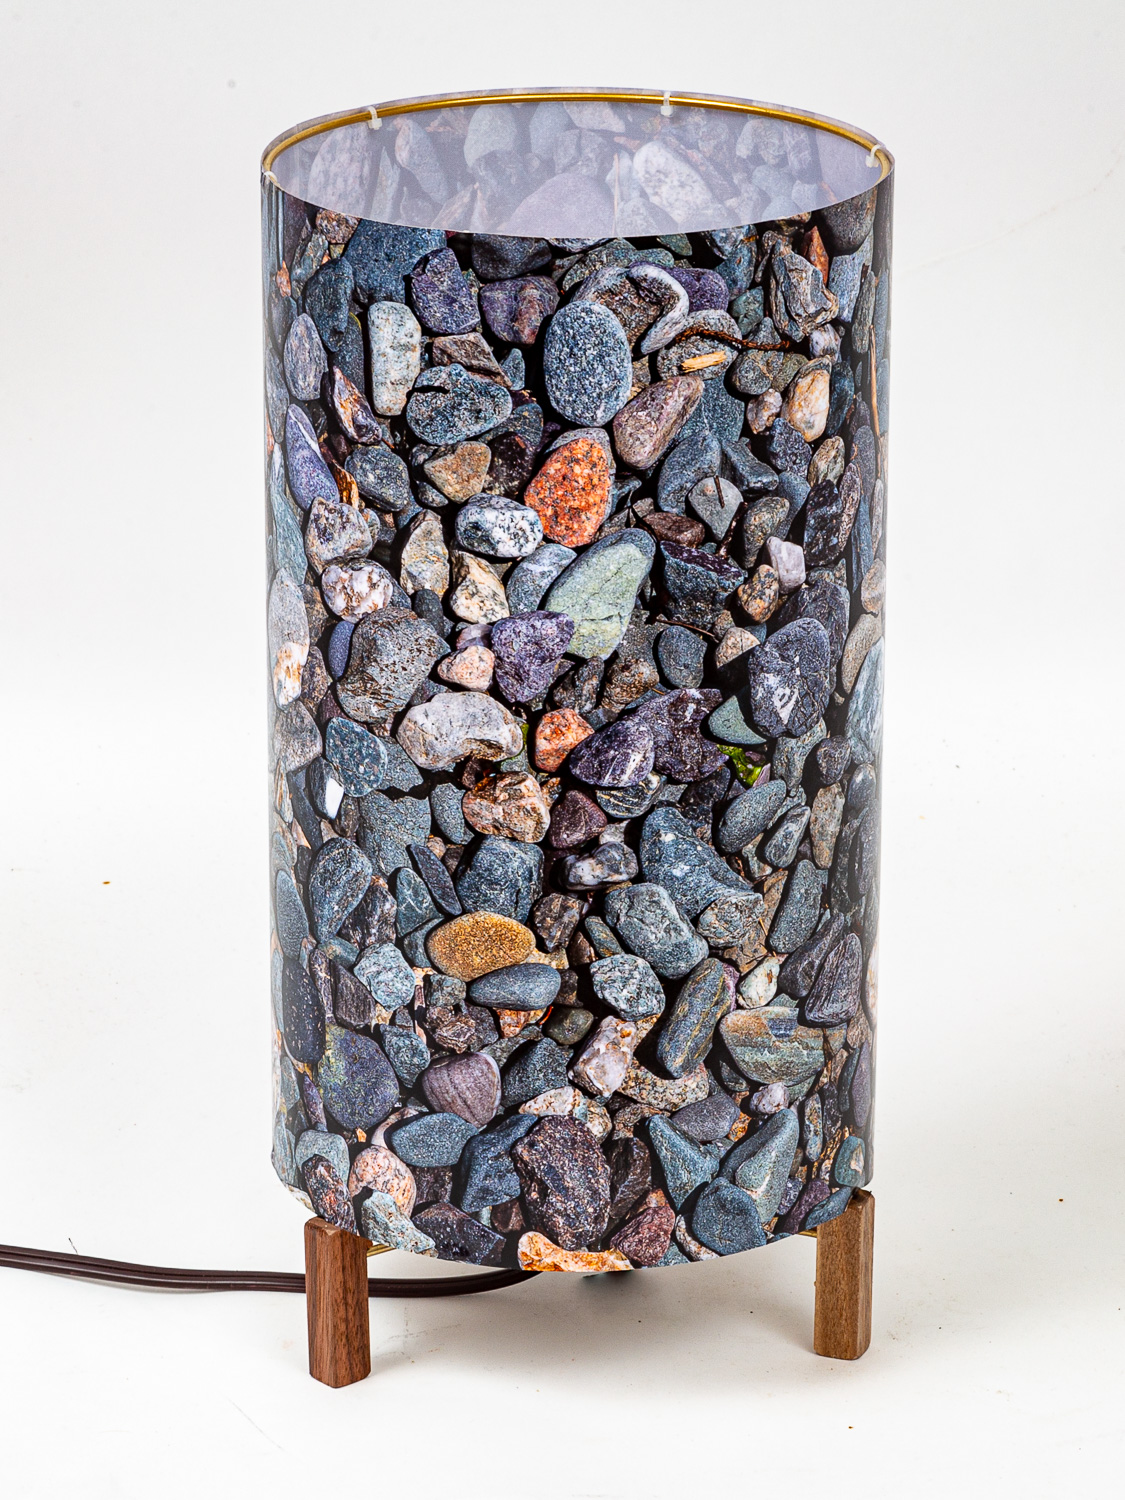 110: Lamp in a shade with photo of beach pebbles -- Photo on Lamp shade by David Elmore